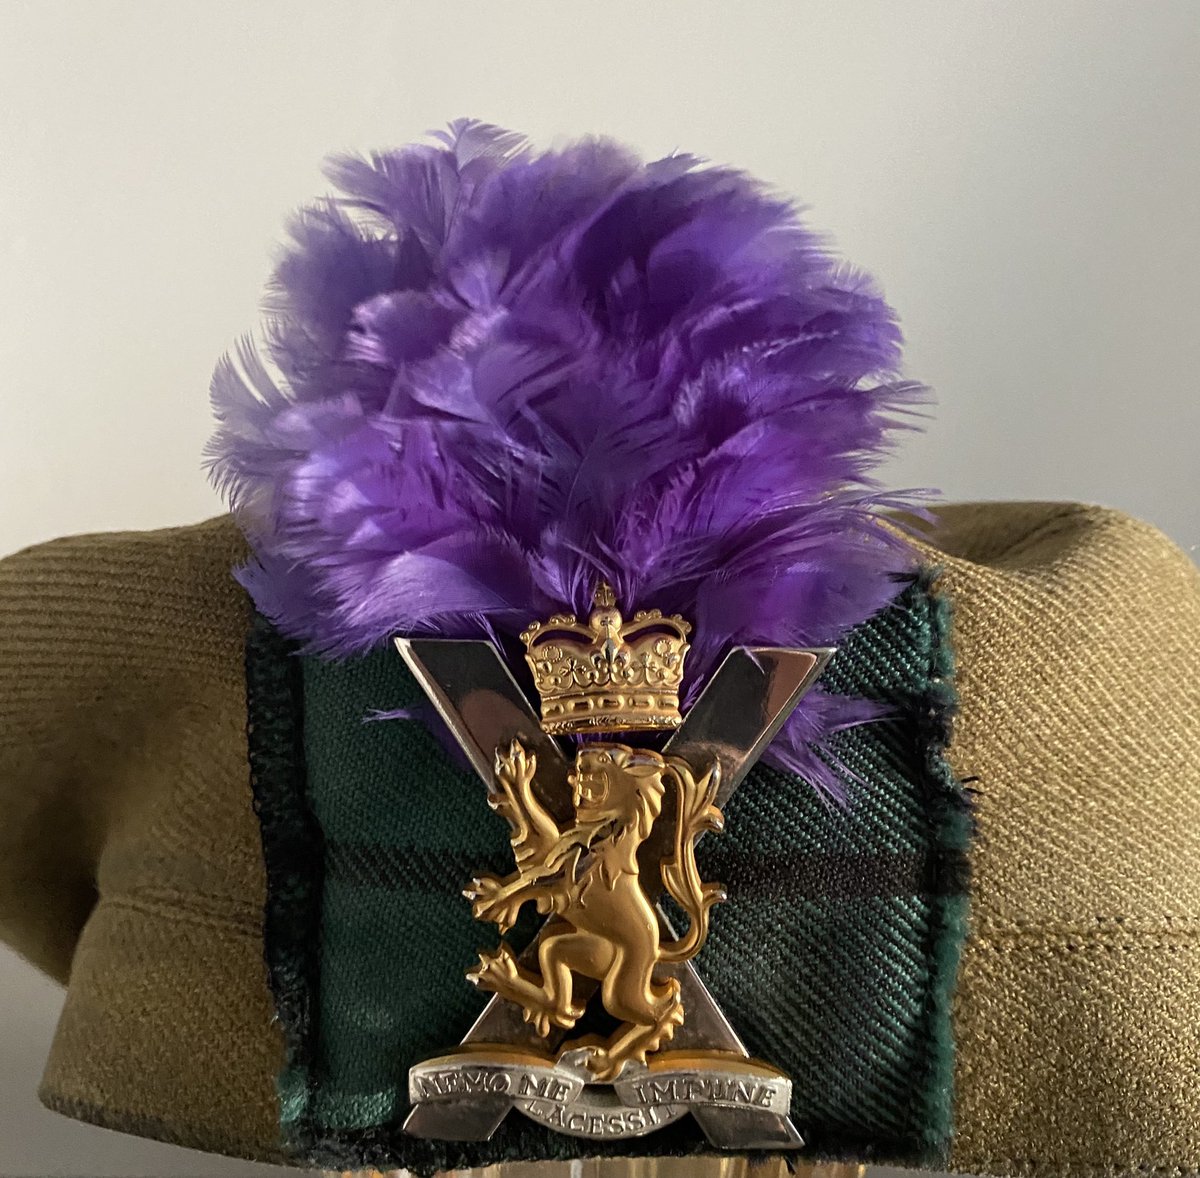 @ArmyinScotland @LGBTYS @PrideInDefence @ArmyLGBT @jomvndi78 @fitzy980 @ASengaged @UKGovScotland Purple is our favourite colour! #PurpleFriday #TurnTheMapPurple #LGBTHM21